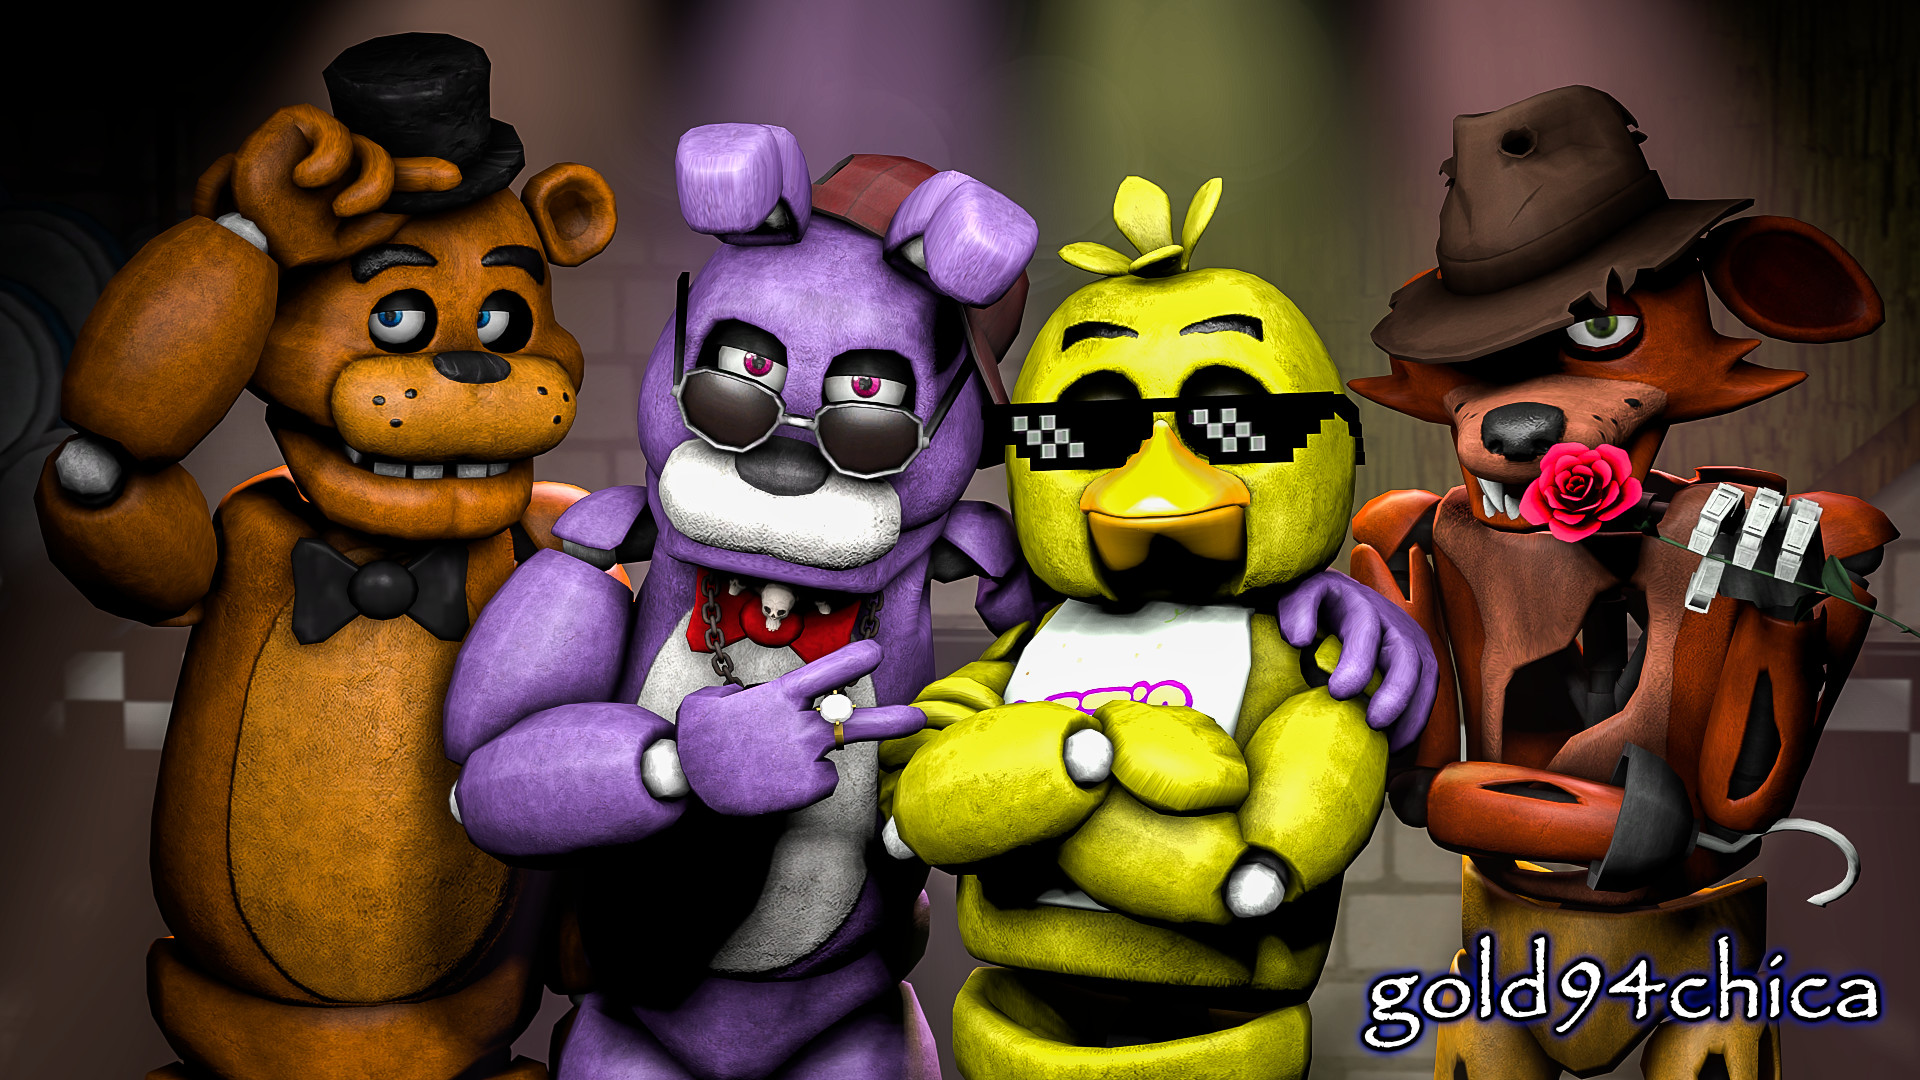 1920x1080 ... Epic Friends Forever (FNAF SFM Wallpaper) by gold94chica